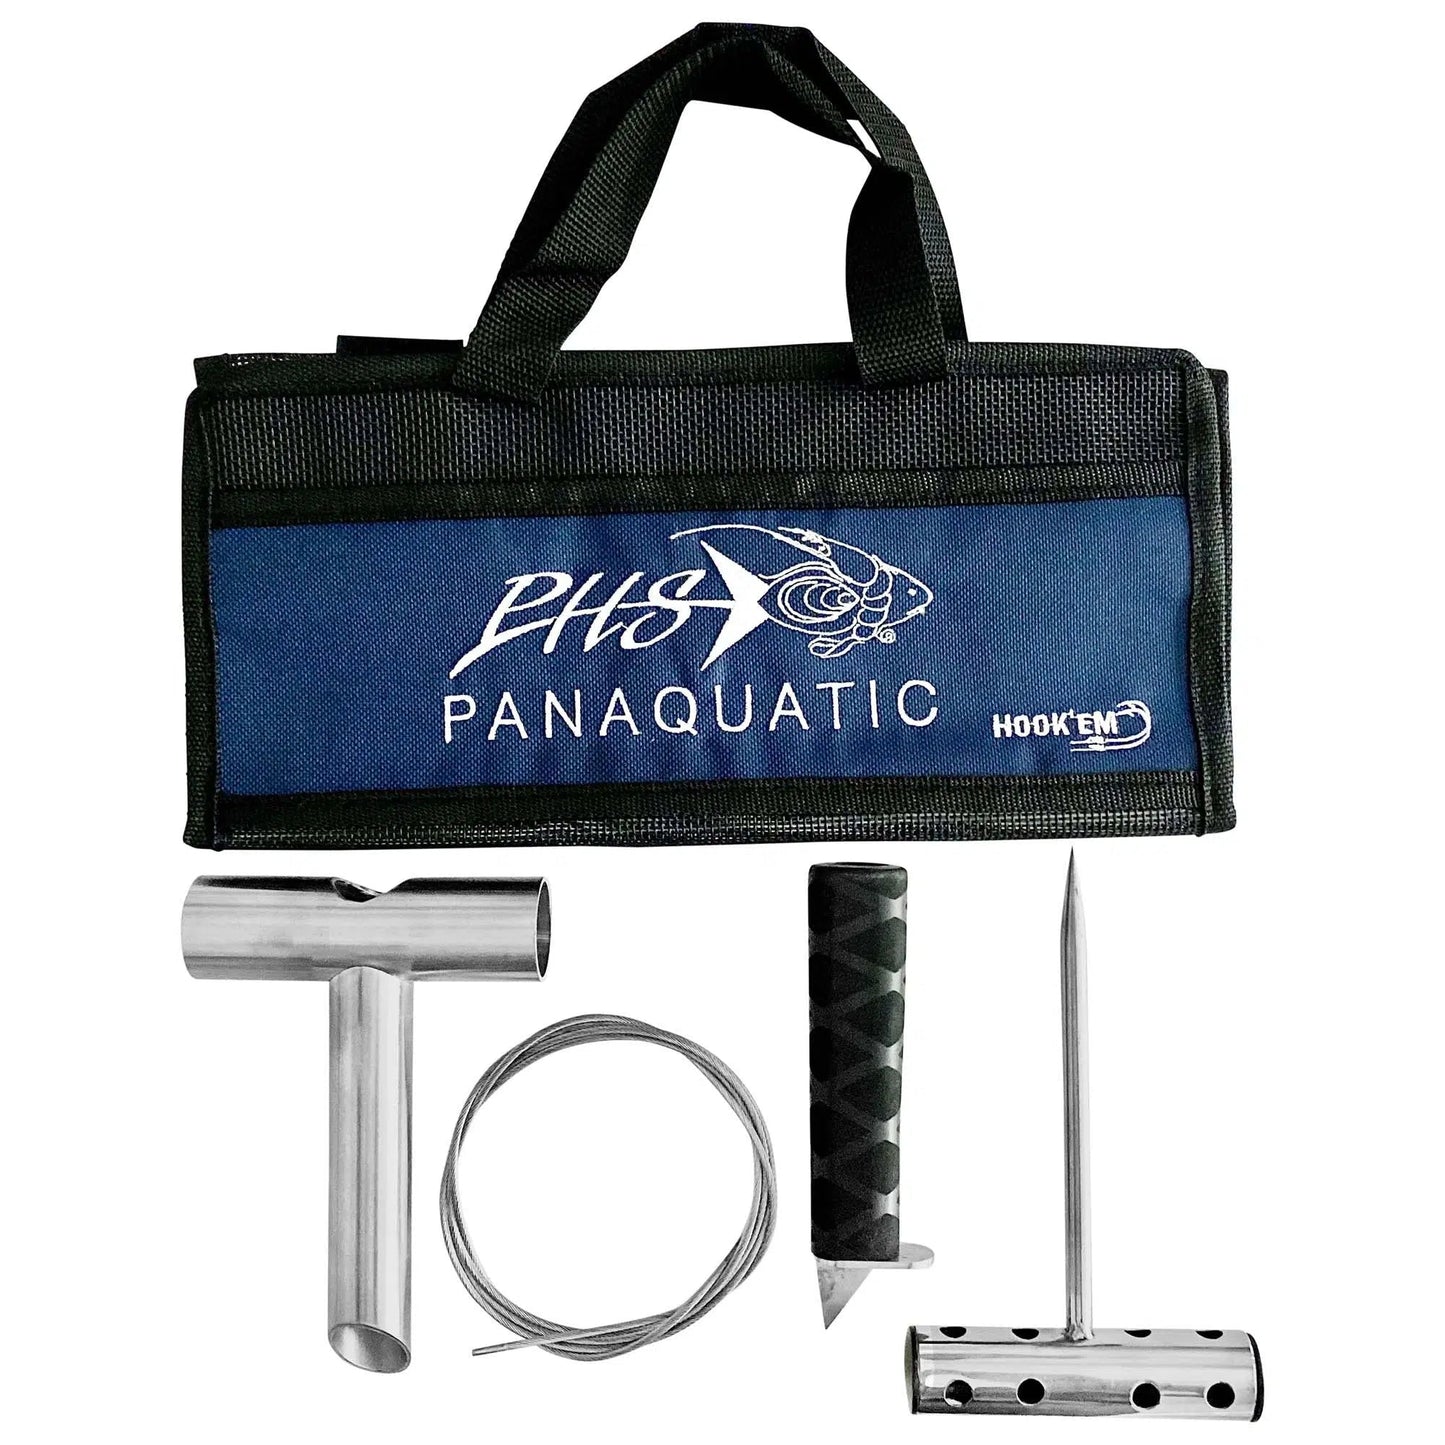 Hookem Panaquatic Tuna Tool Kit with Storage Pouch-Gaffs & Catch and Release Tools-Hookem-Fishing Station